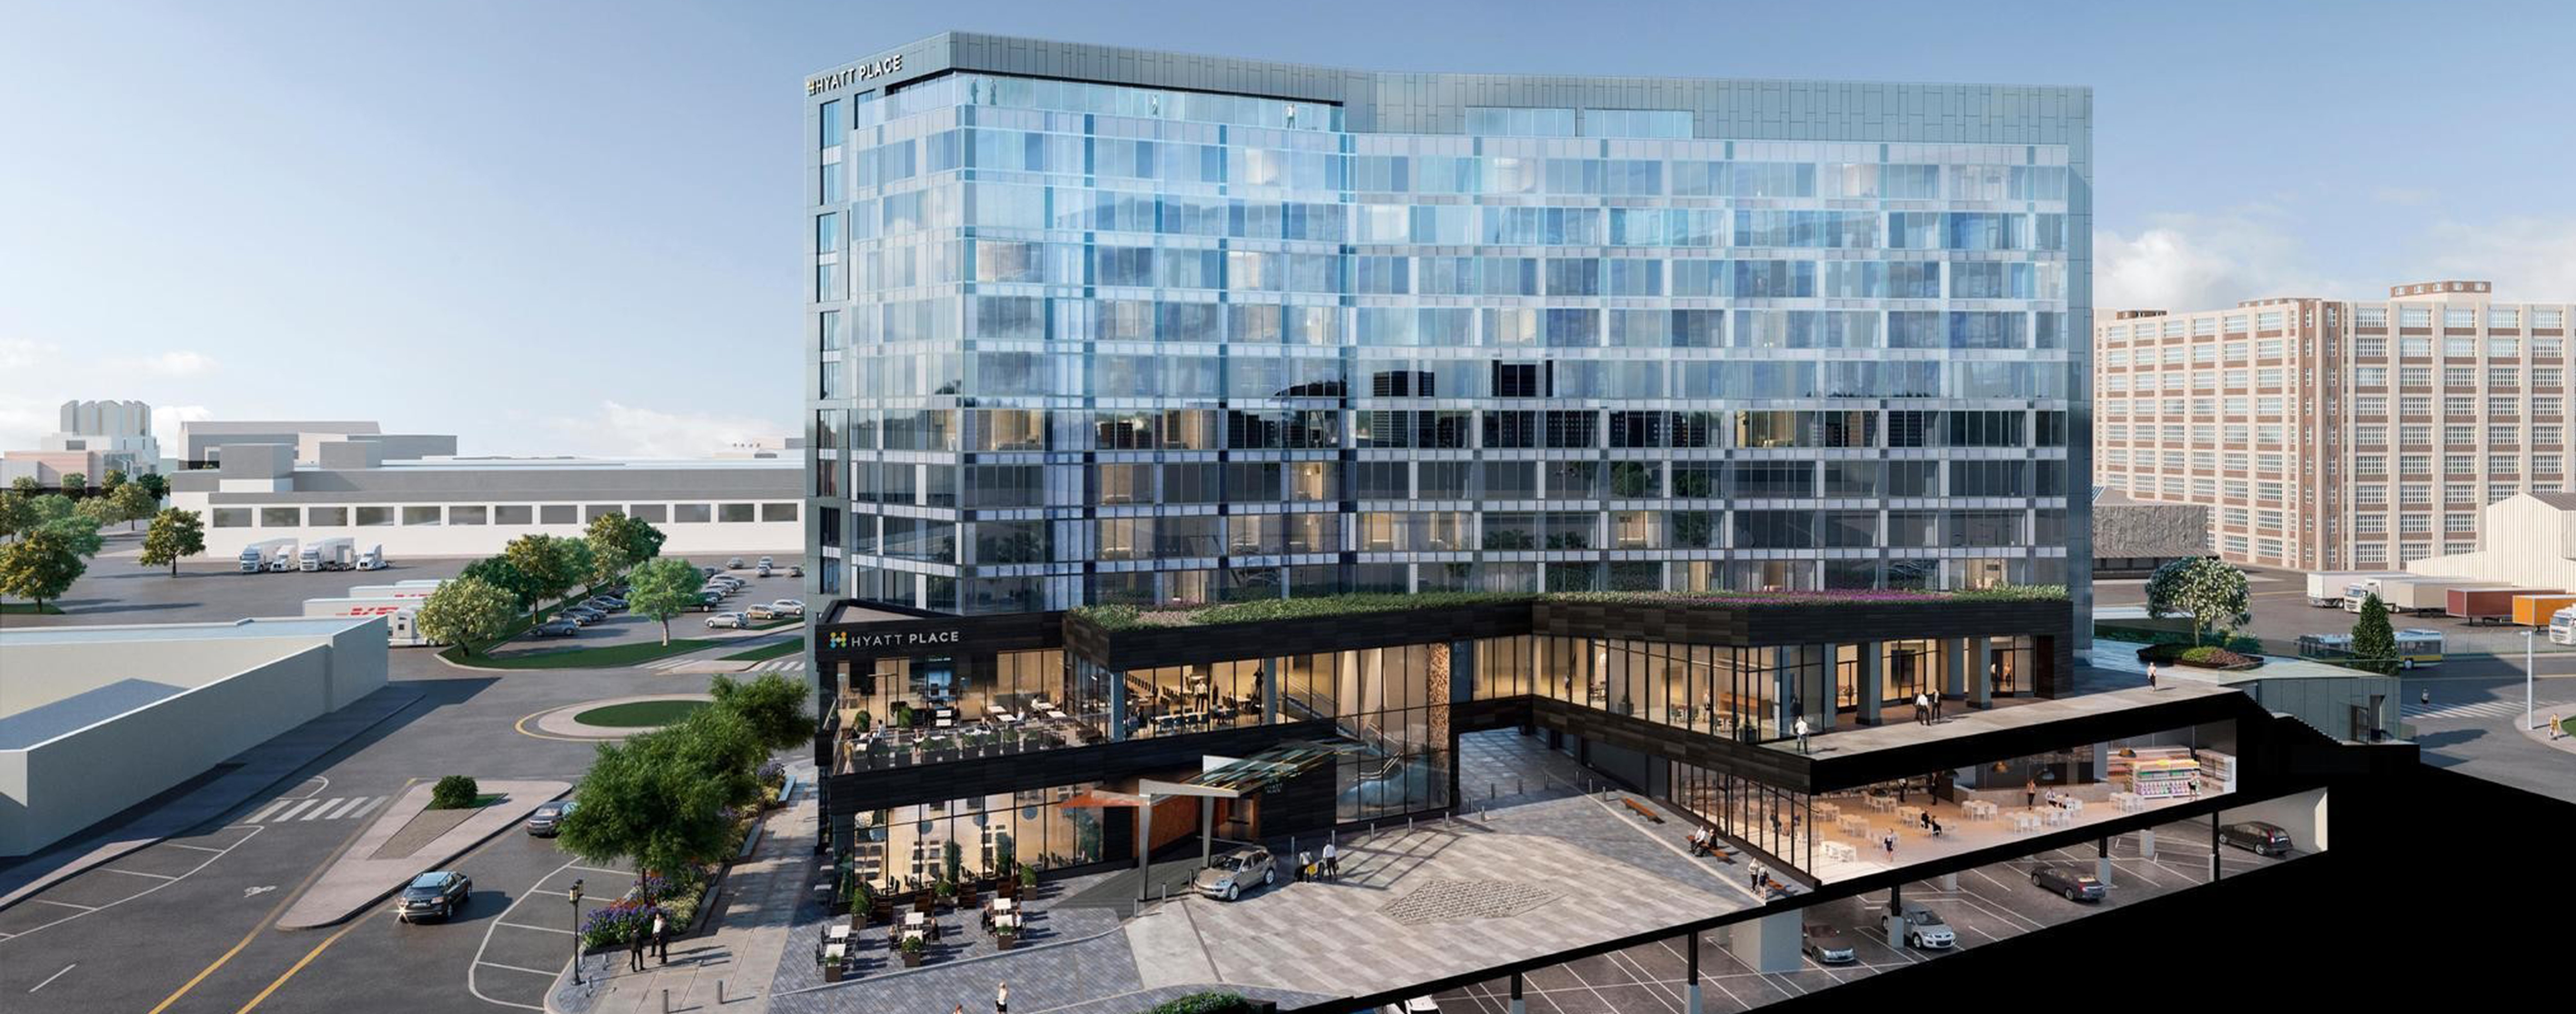 Hyatt Place Boston/Seaport District is Now Officially Open